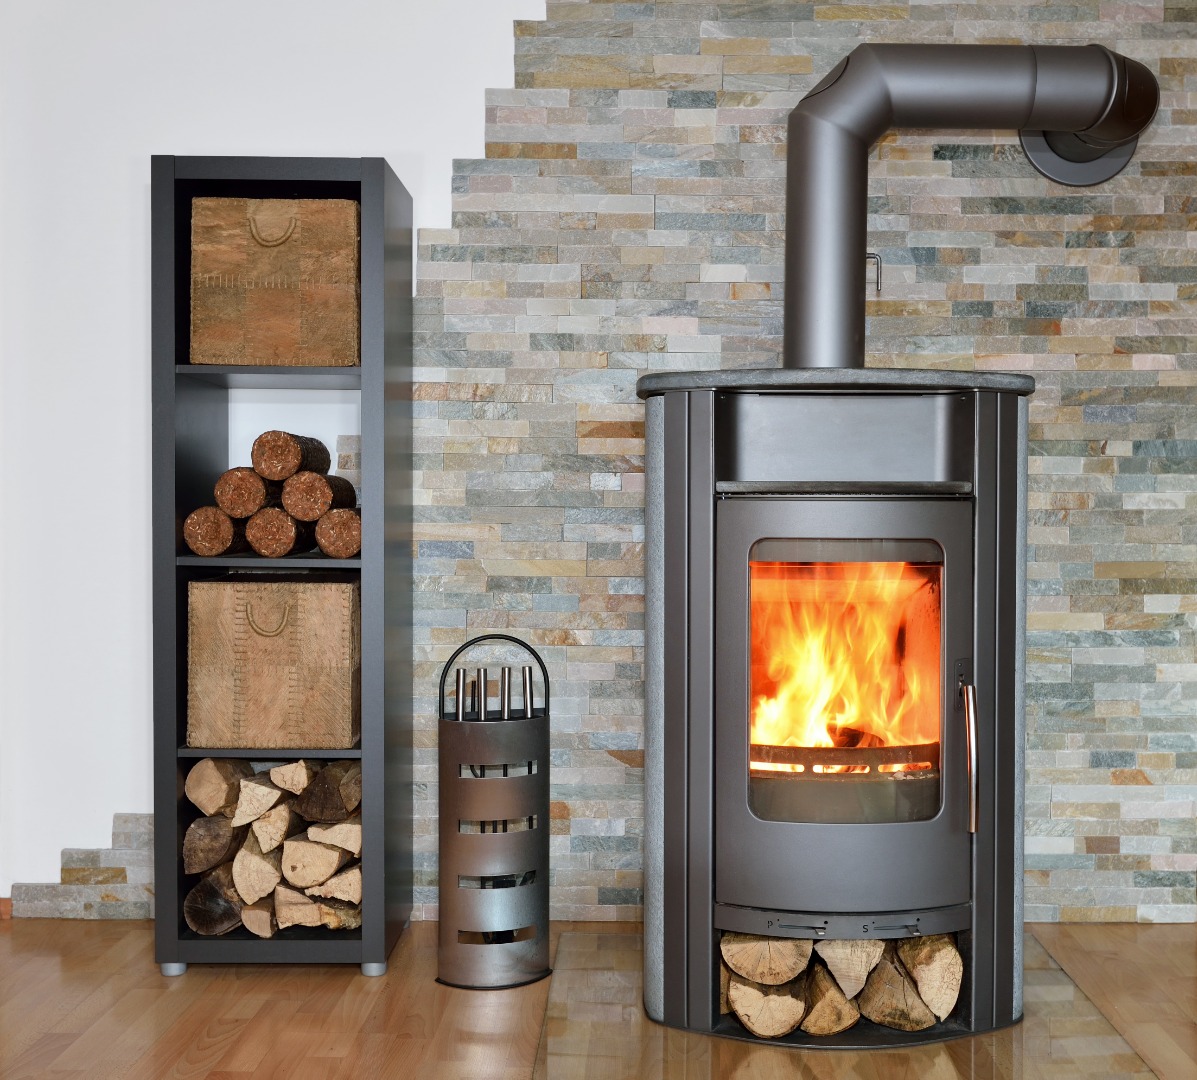 Air pollution from household wood stoves